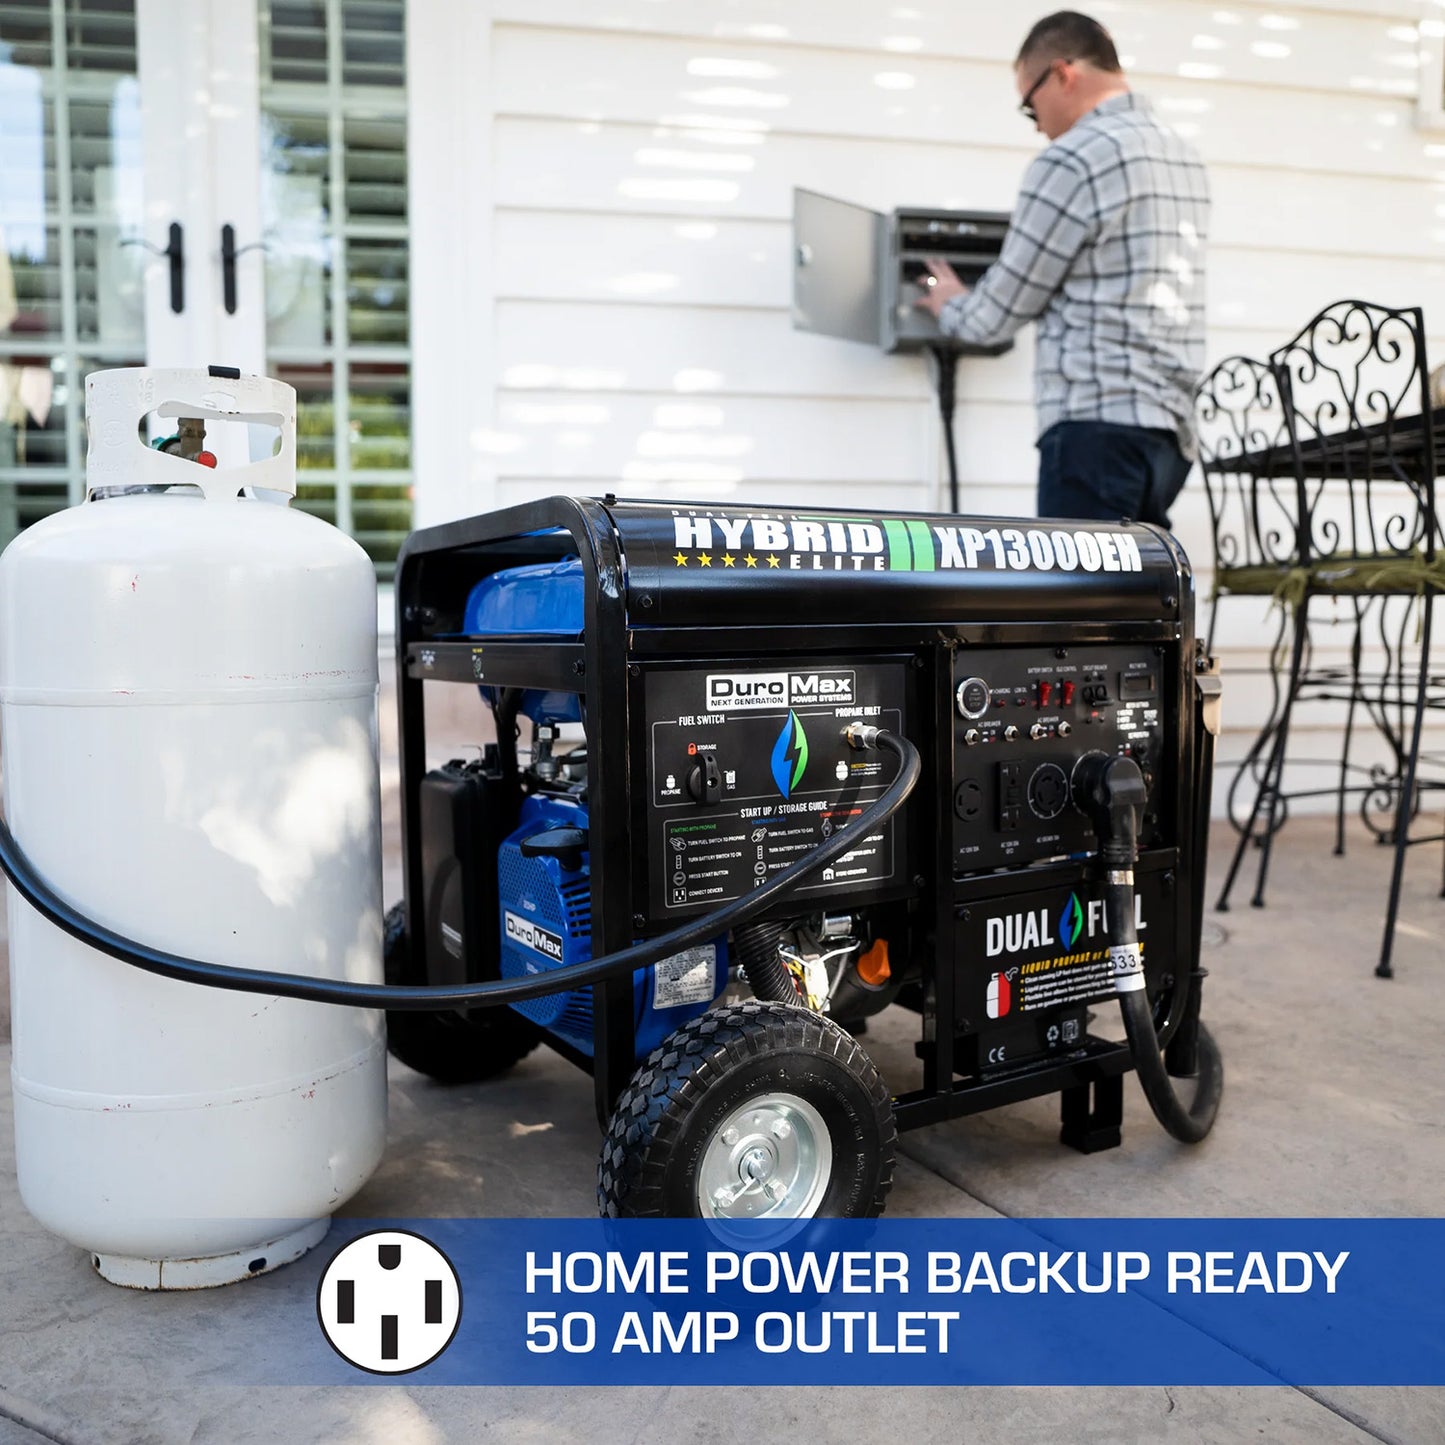 DuroMax XP13000EH Dual Fuel Portable Generator - 50Amp Outlet